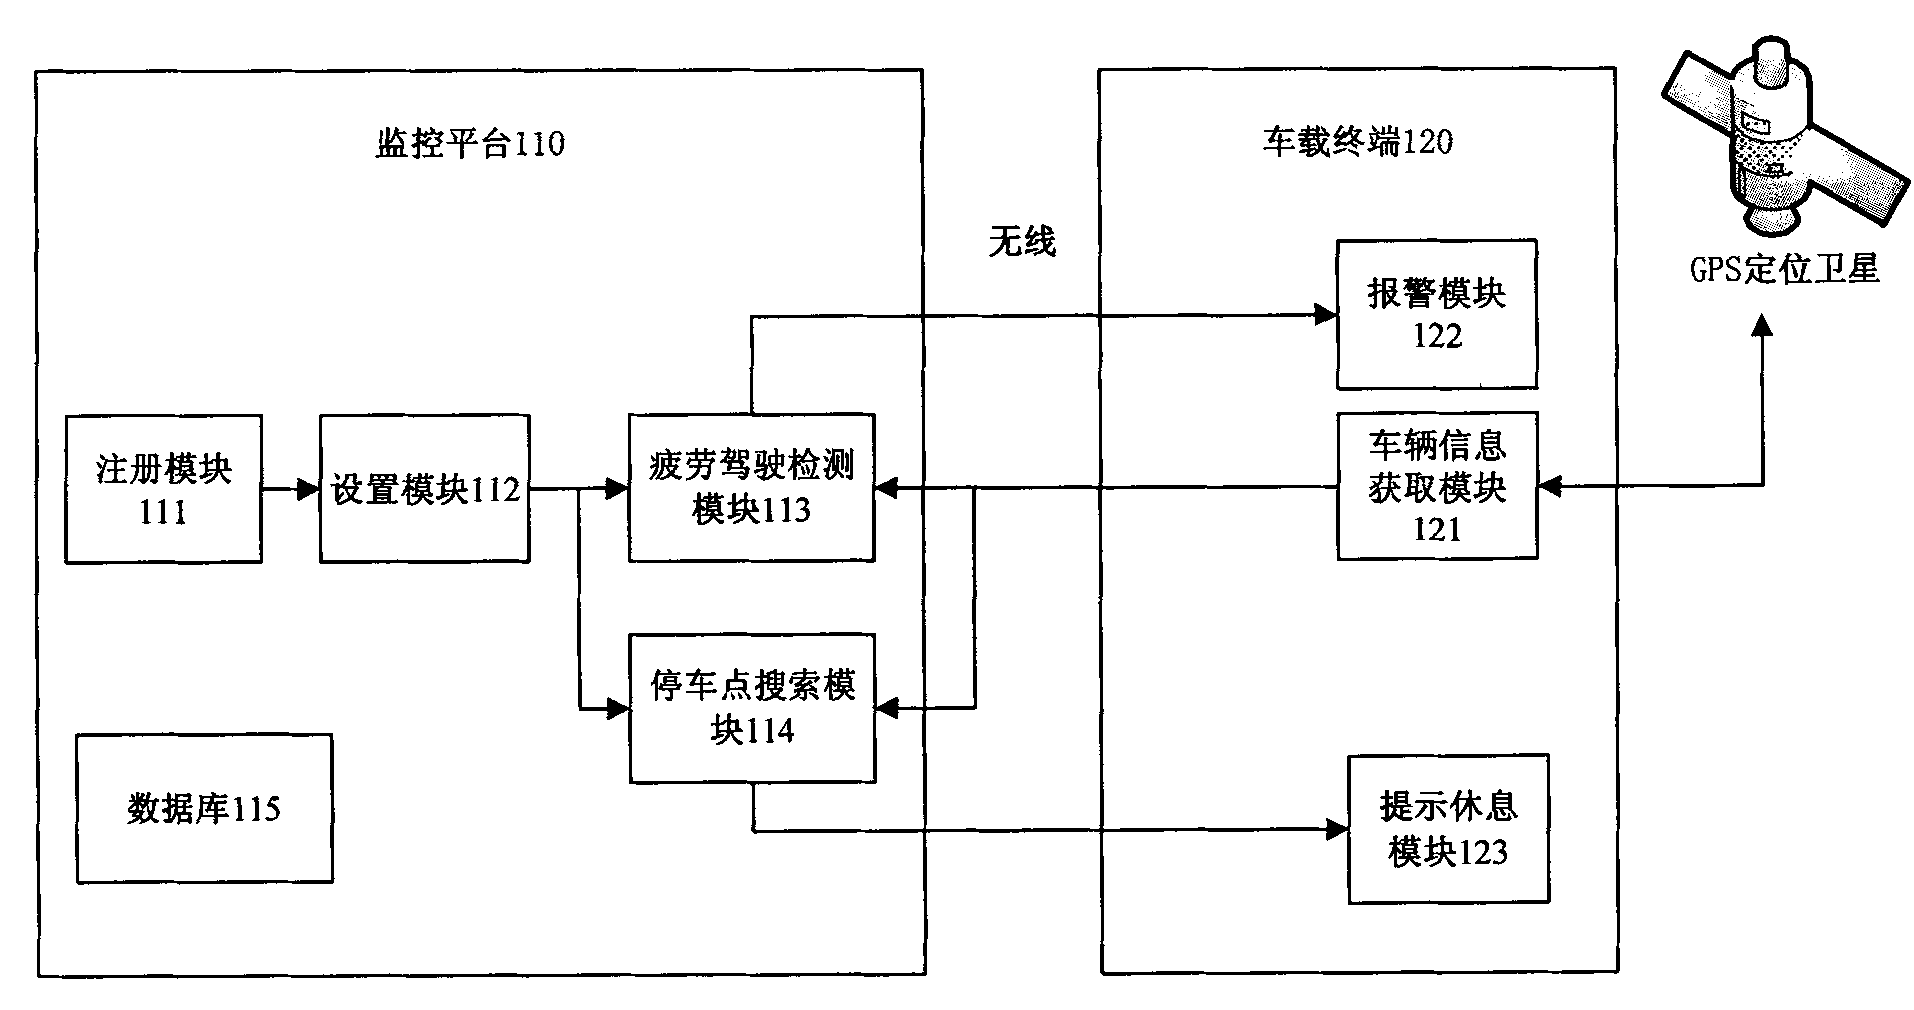 Vehicle DAS (Driver Assistant System) and method